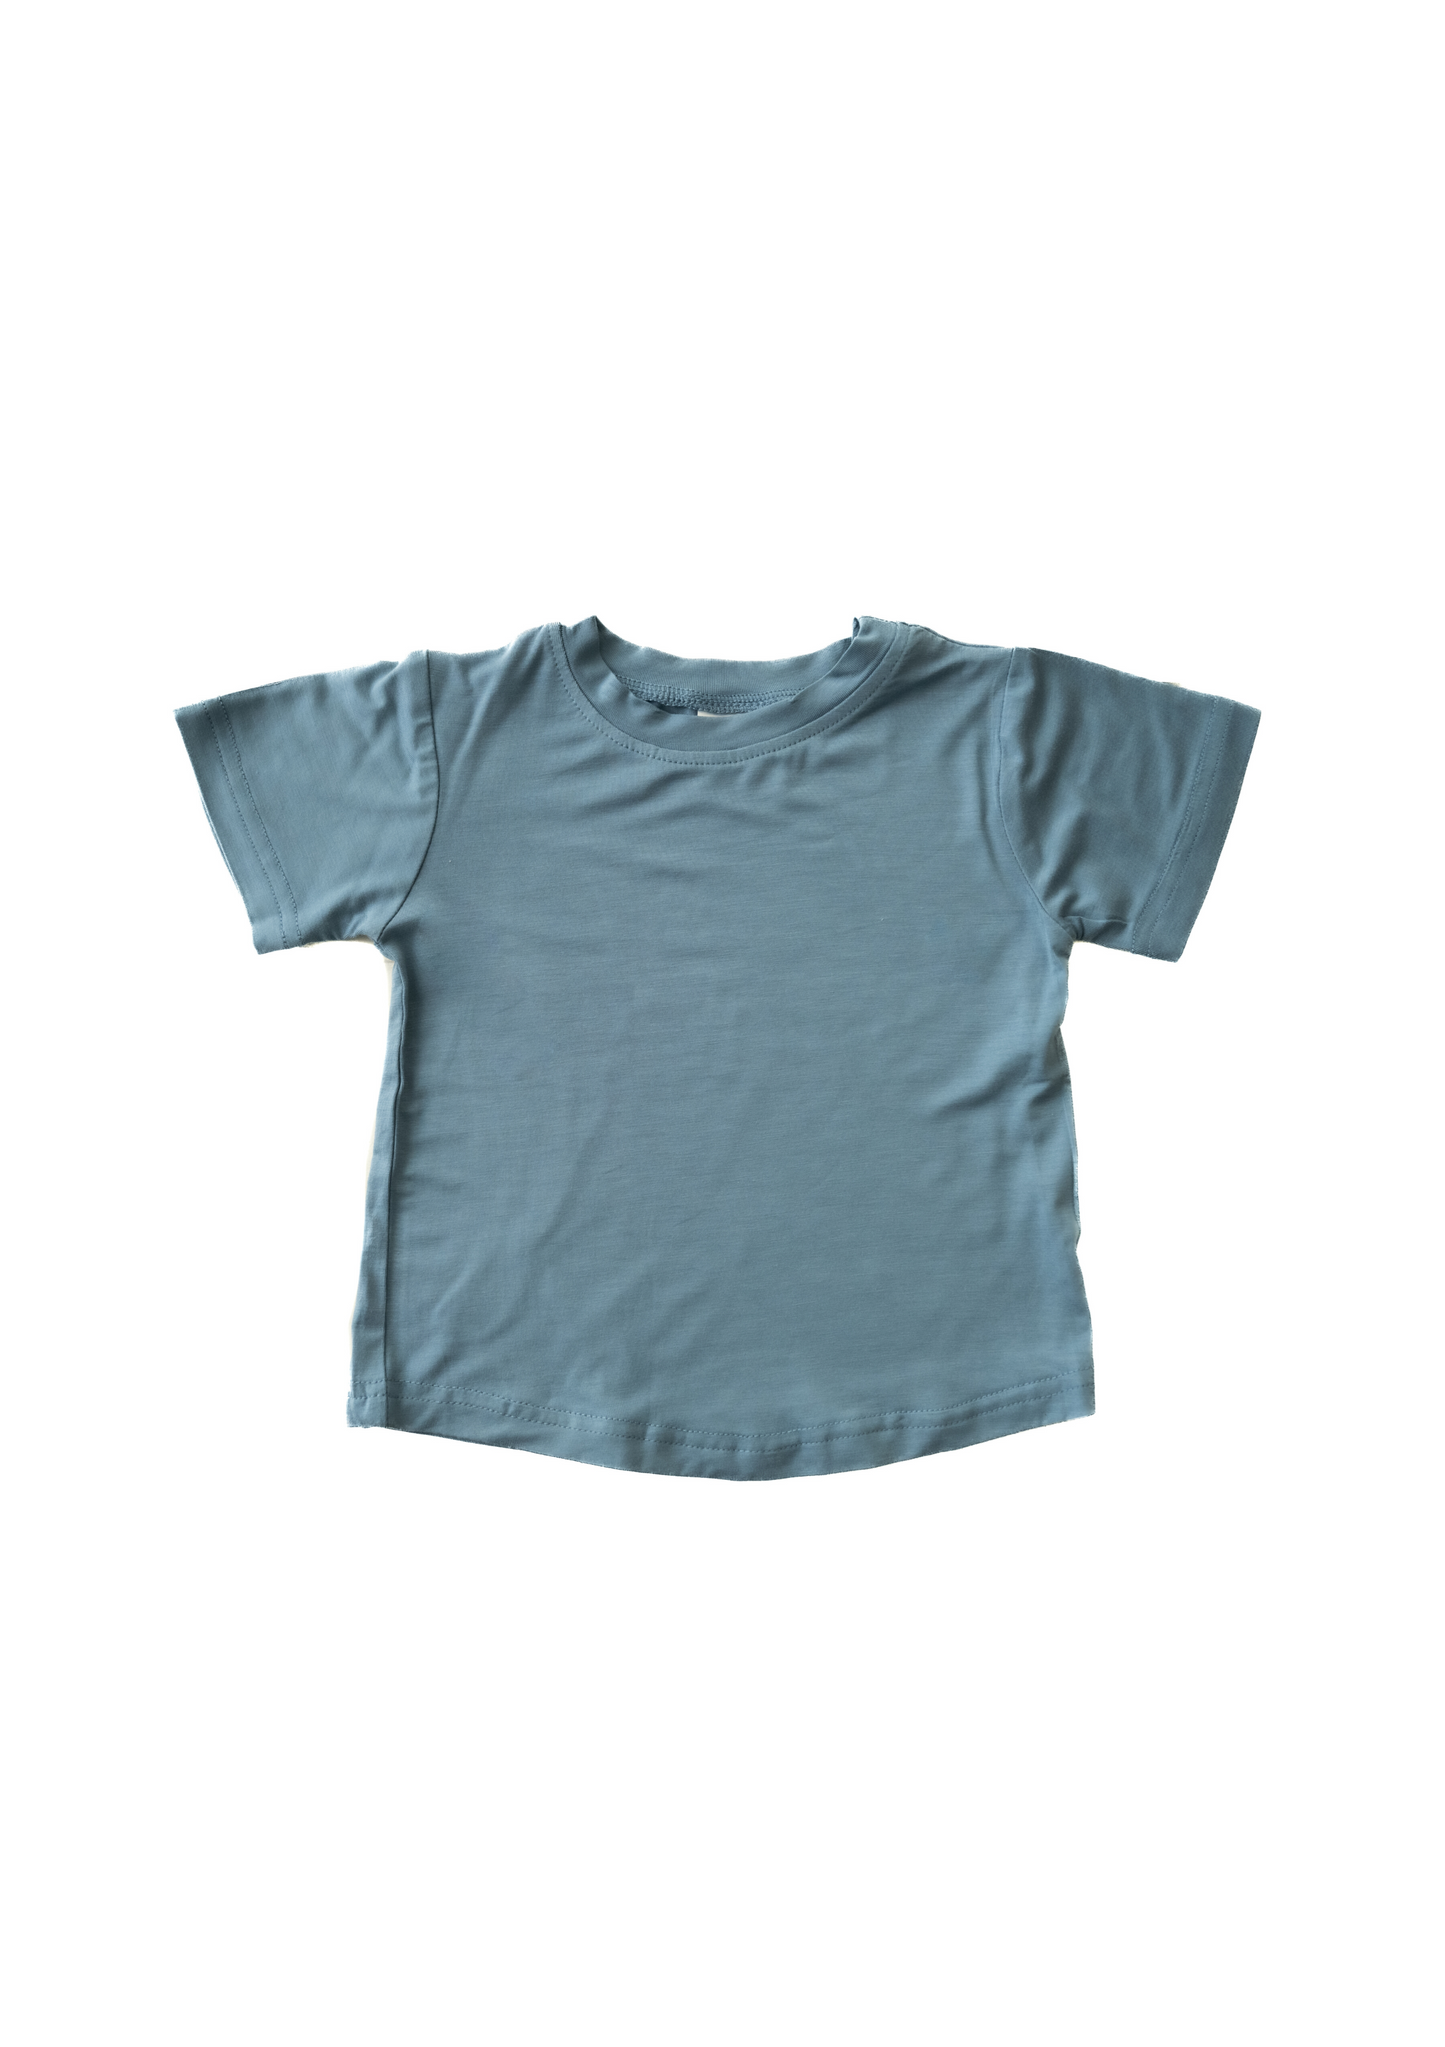 BAMBOO TEE IN GLACIER BLUE